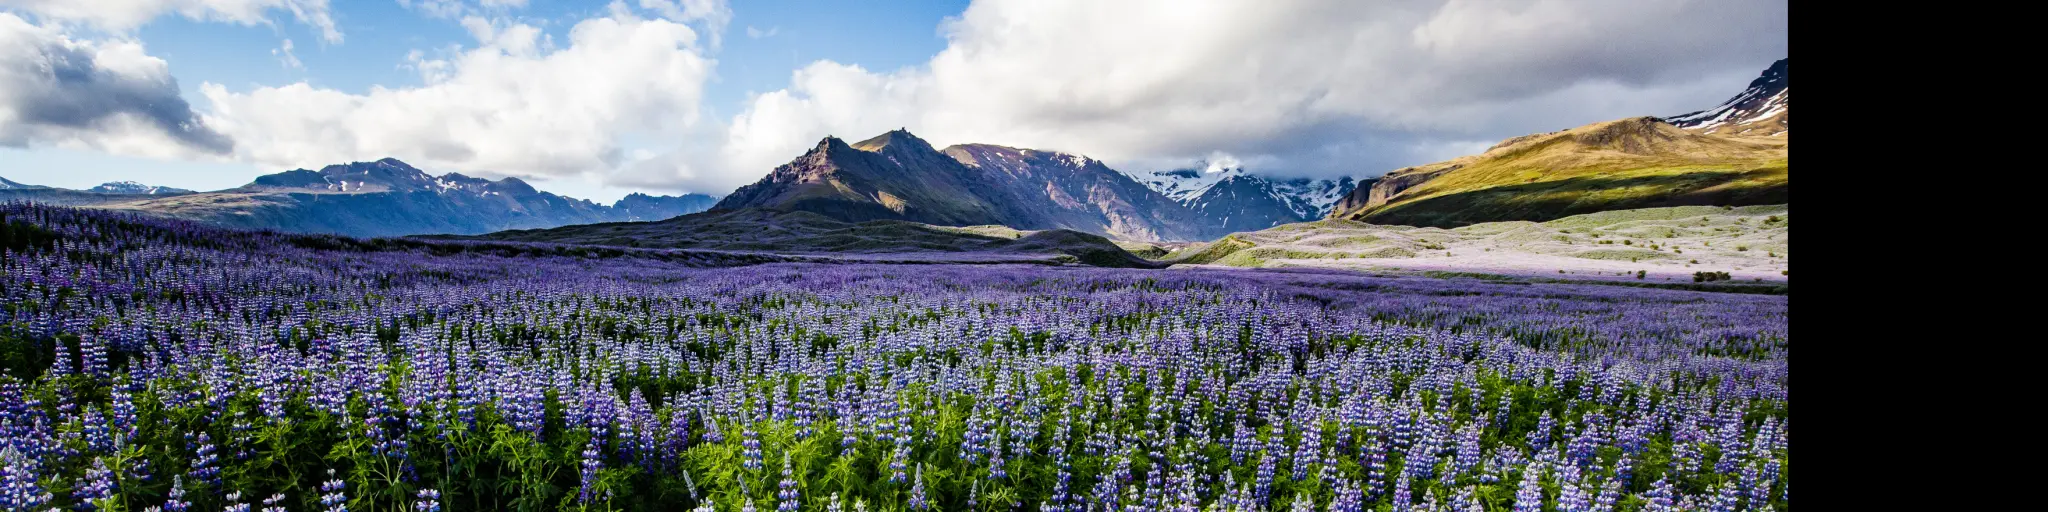 Best time to go to Iceland is June to August when the days are longest